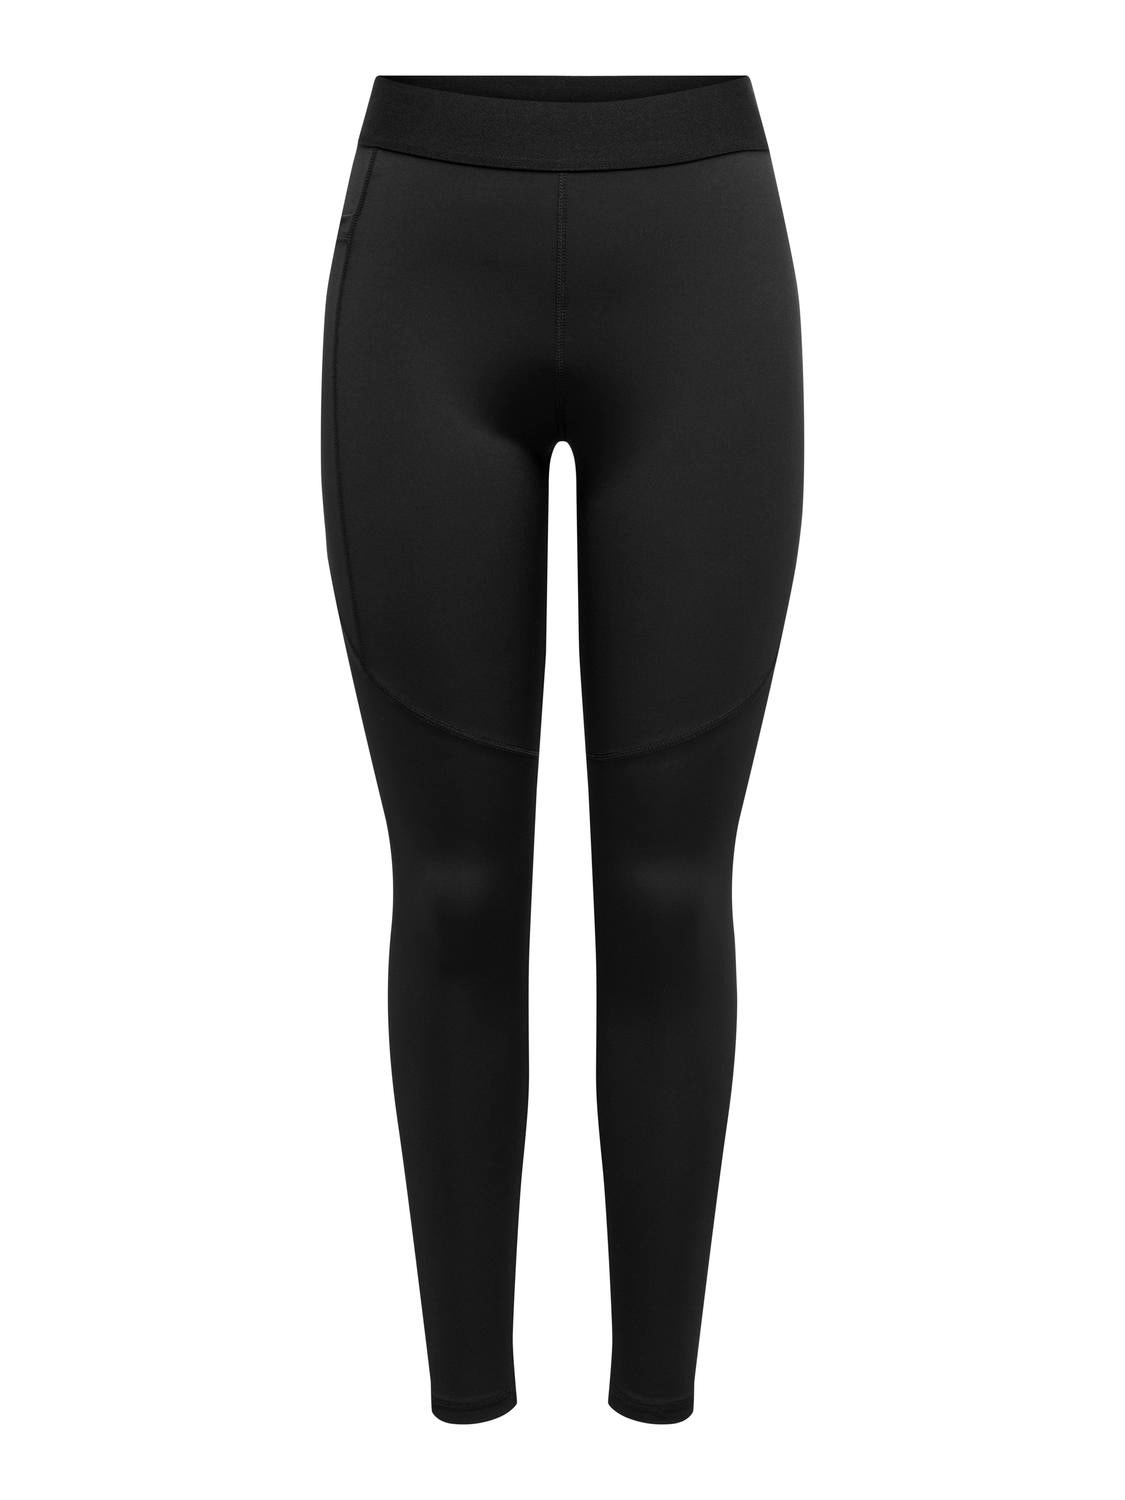 ONLY Tight fit High waist Legging -Black - 15318639